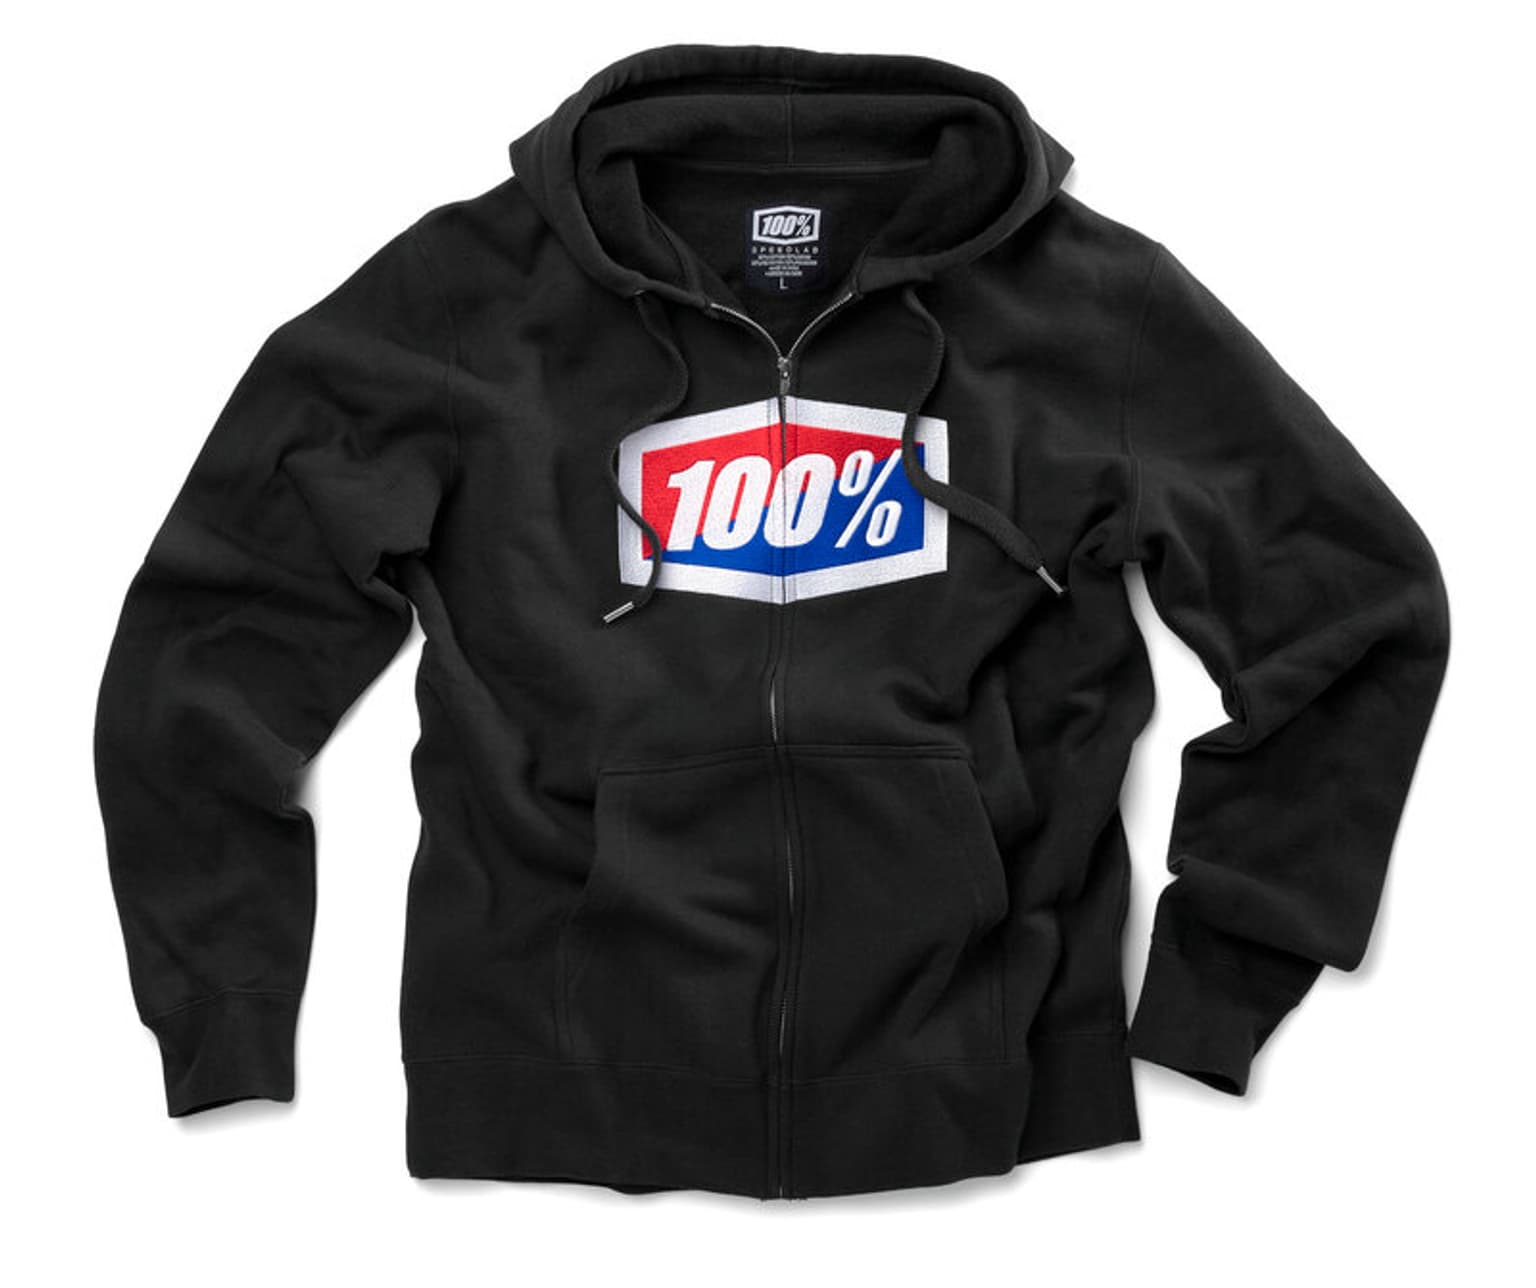 100% 100% Official Hoodie nero 1